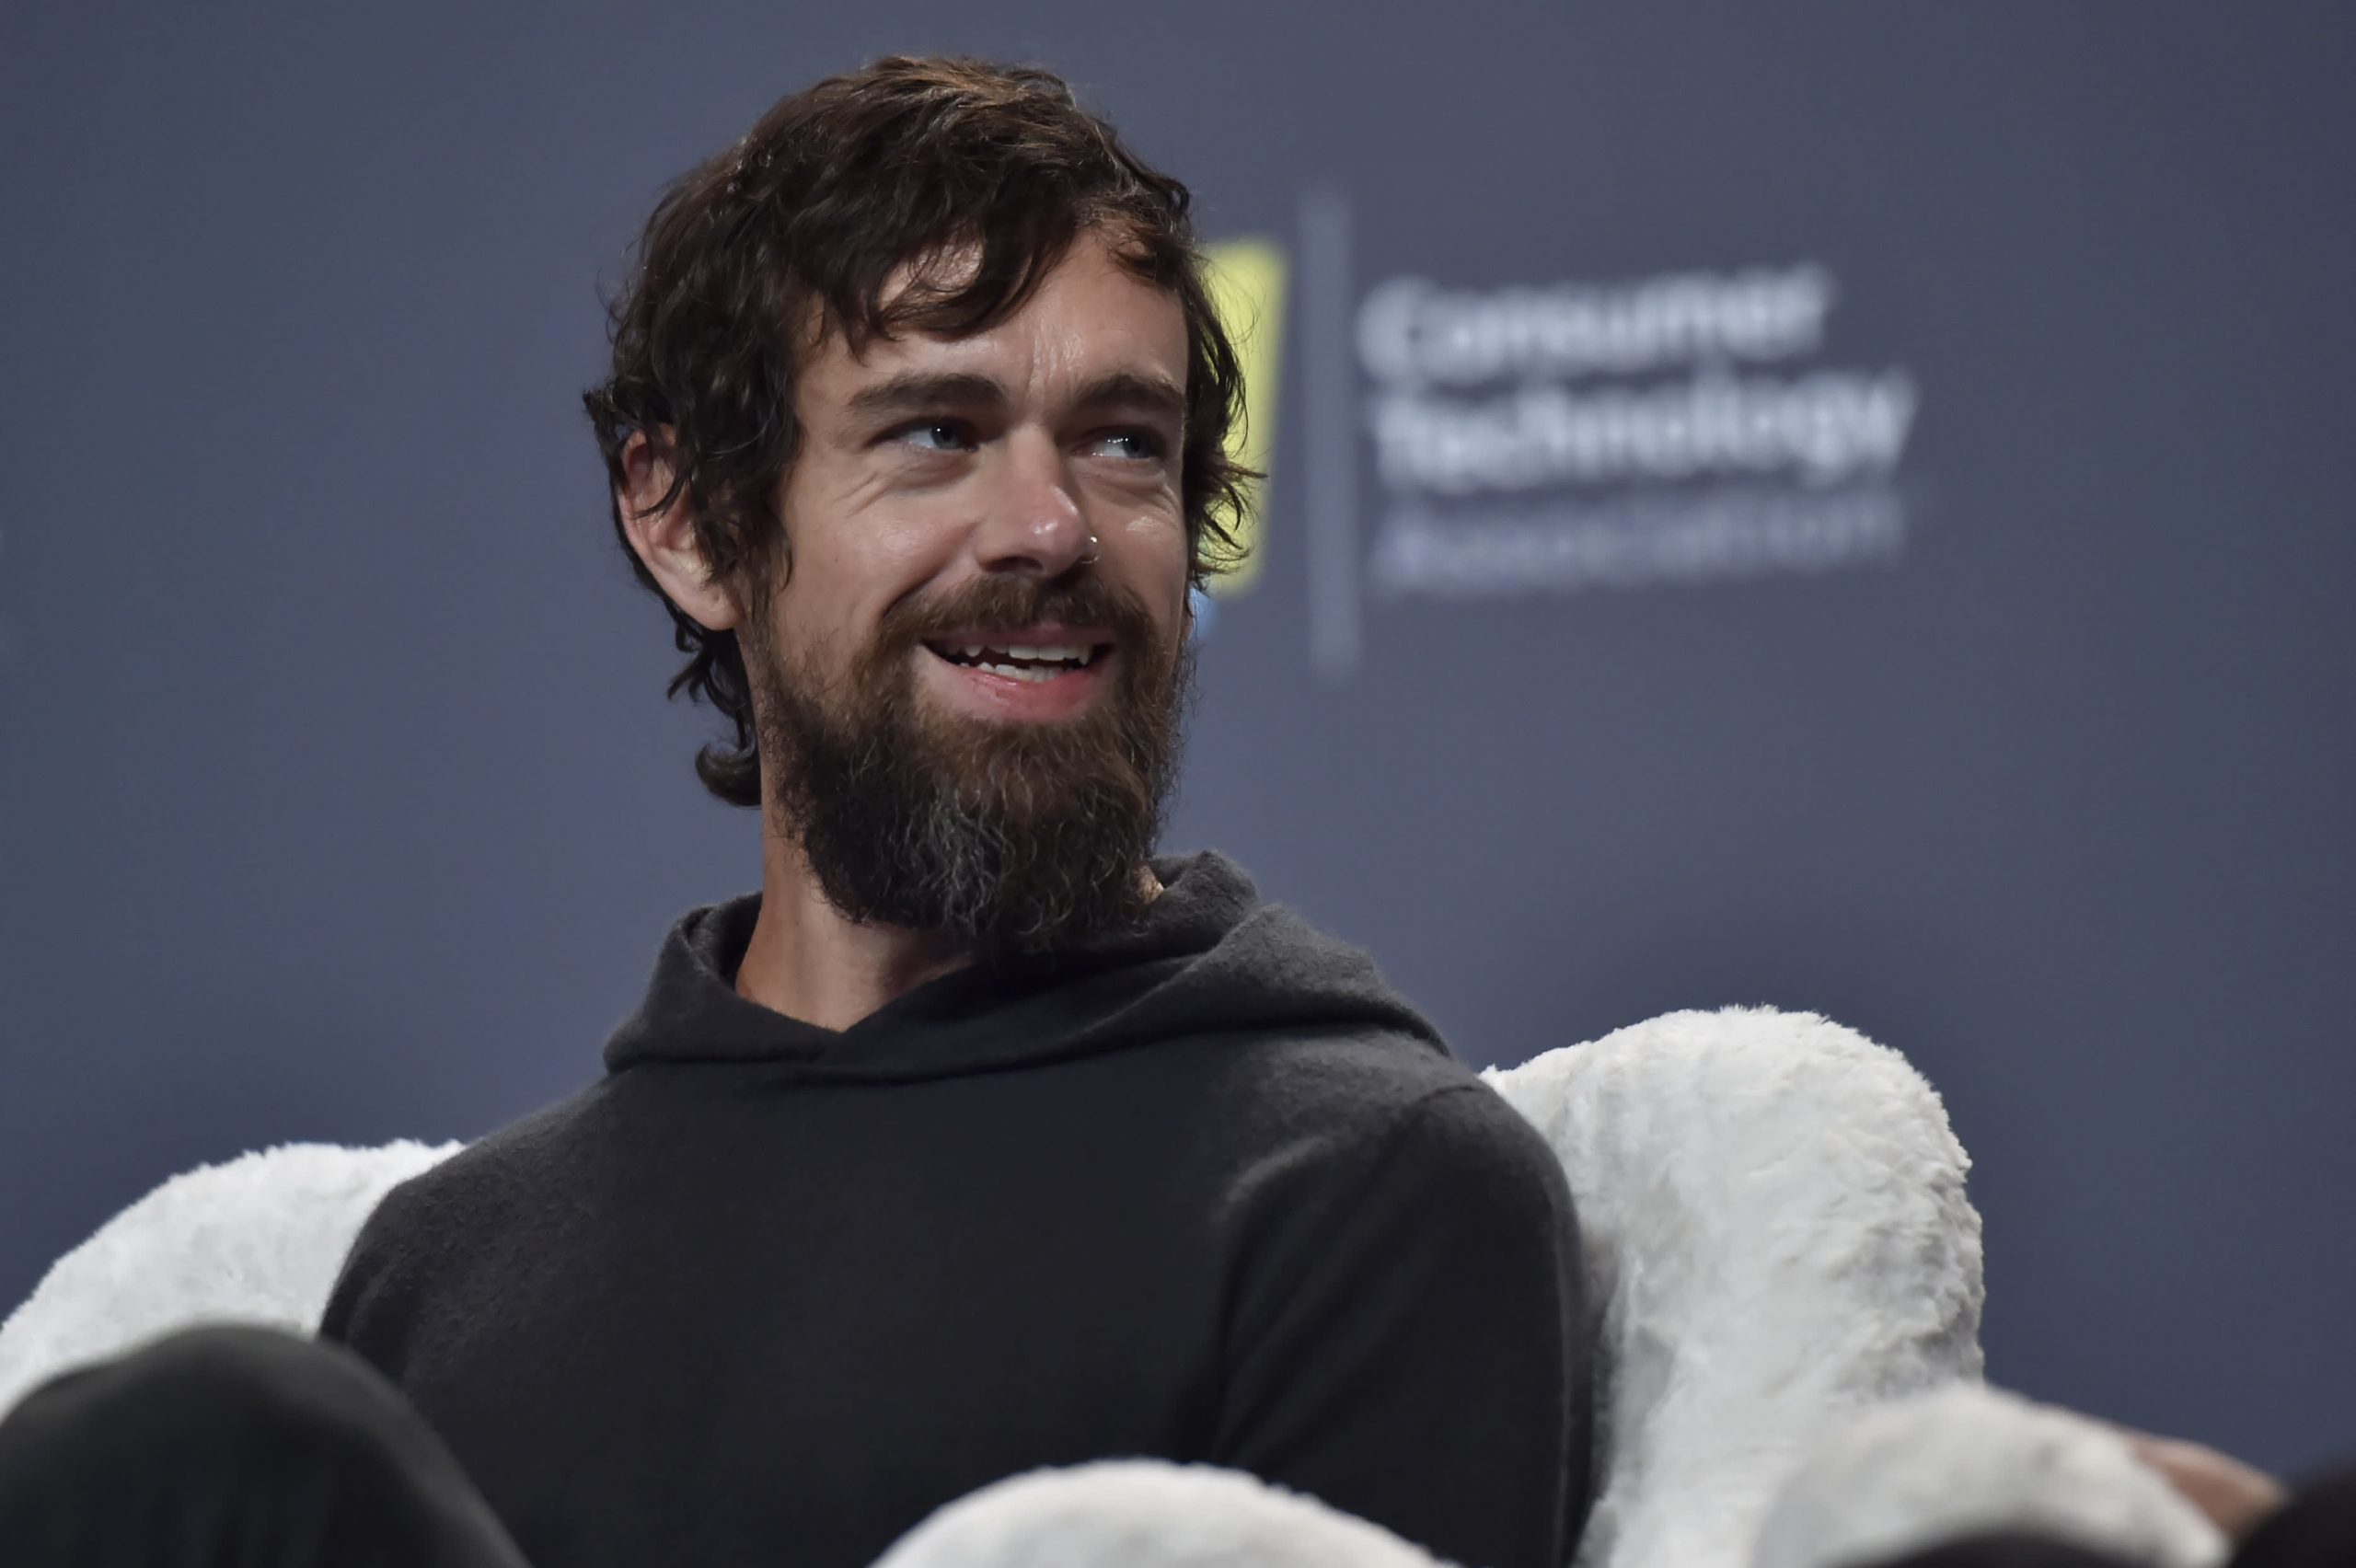 Twitter is 'bigger than any one account,' says Dorsey in first earnings call after Trump ban